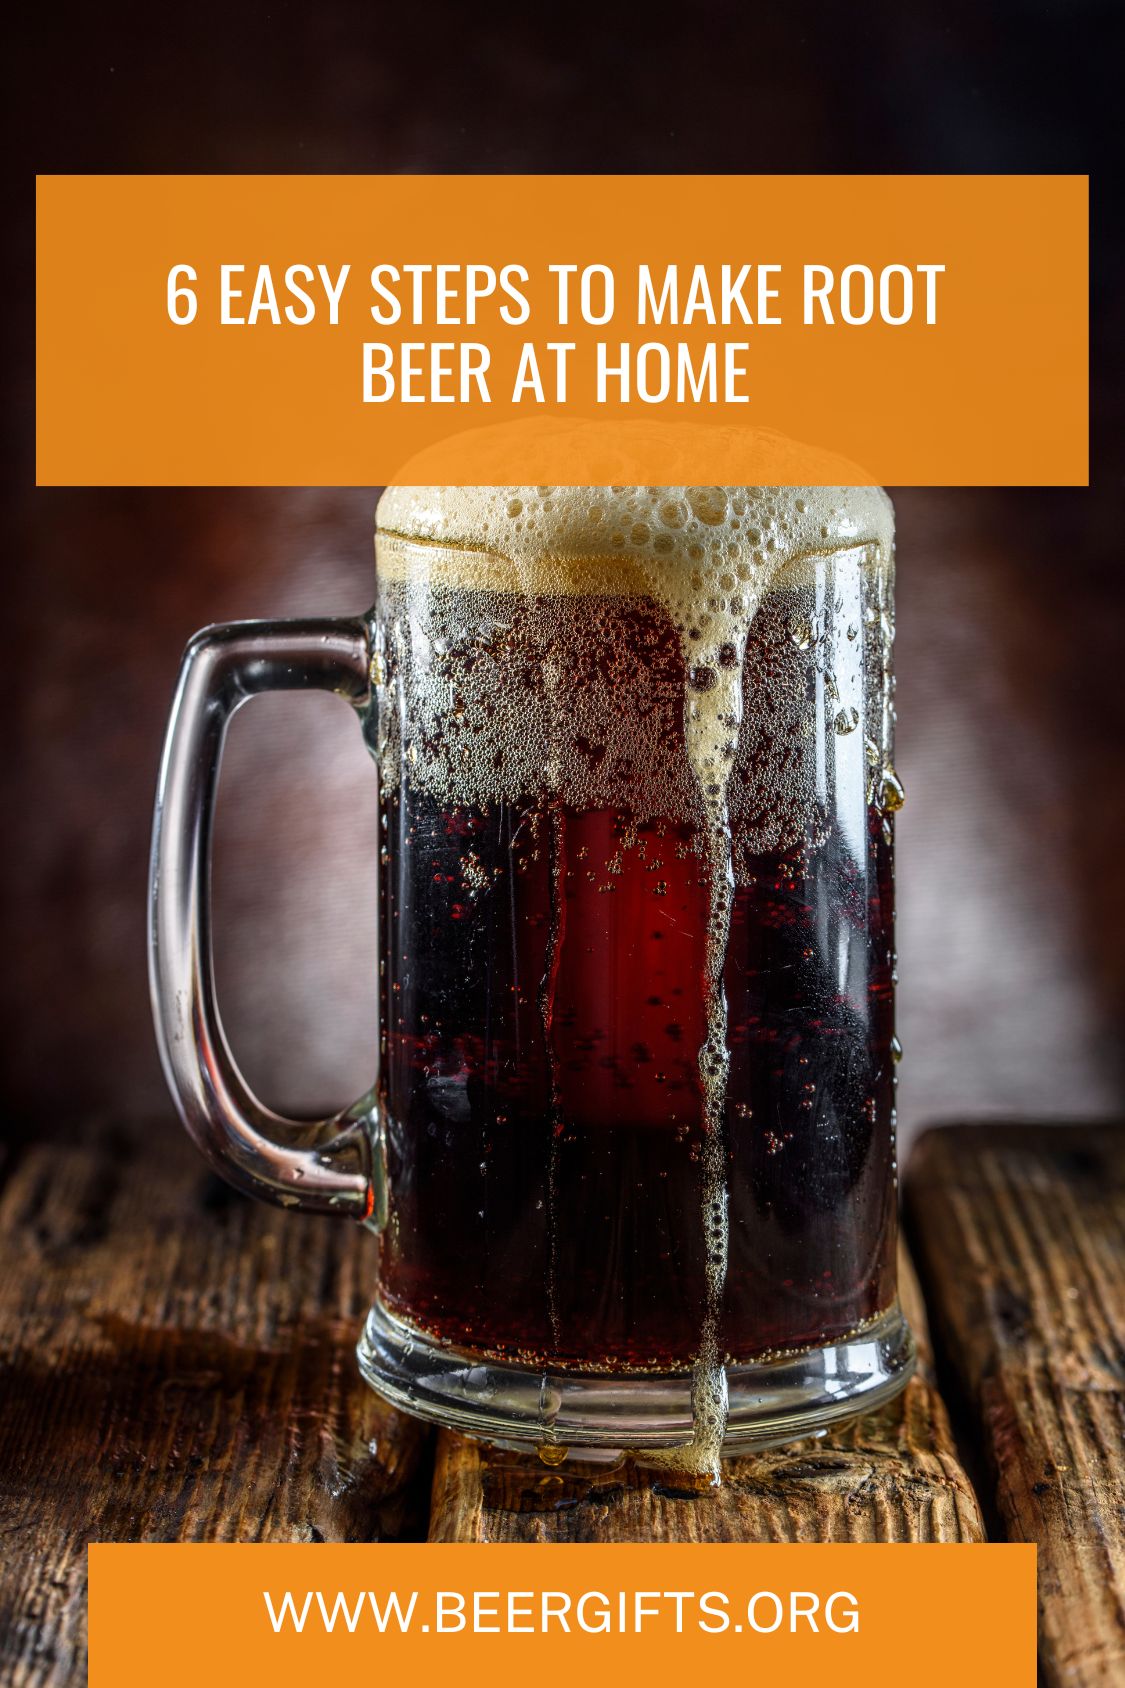 6 Easy Steps to Make Root Beer at Home1